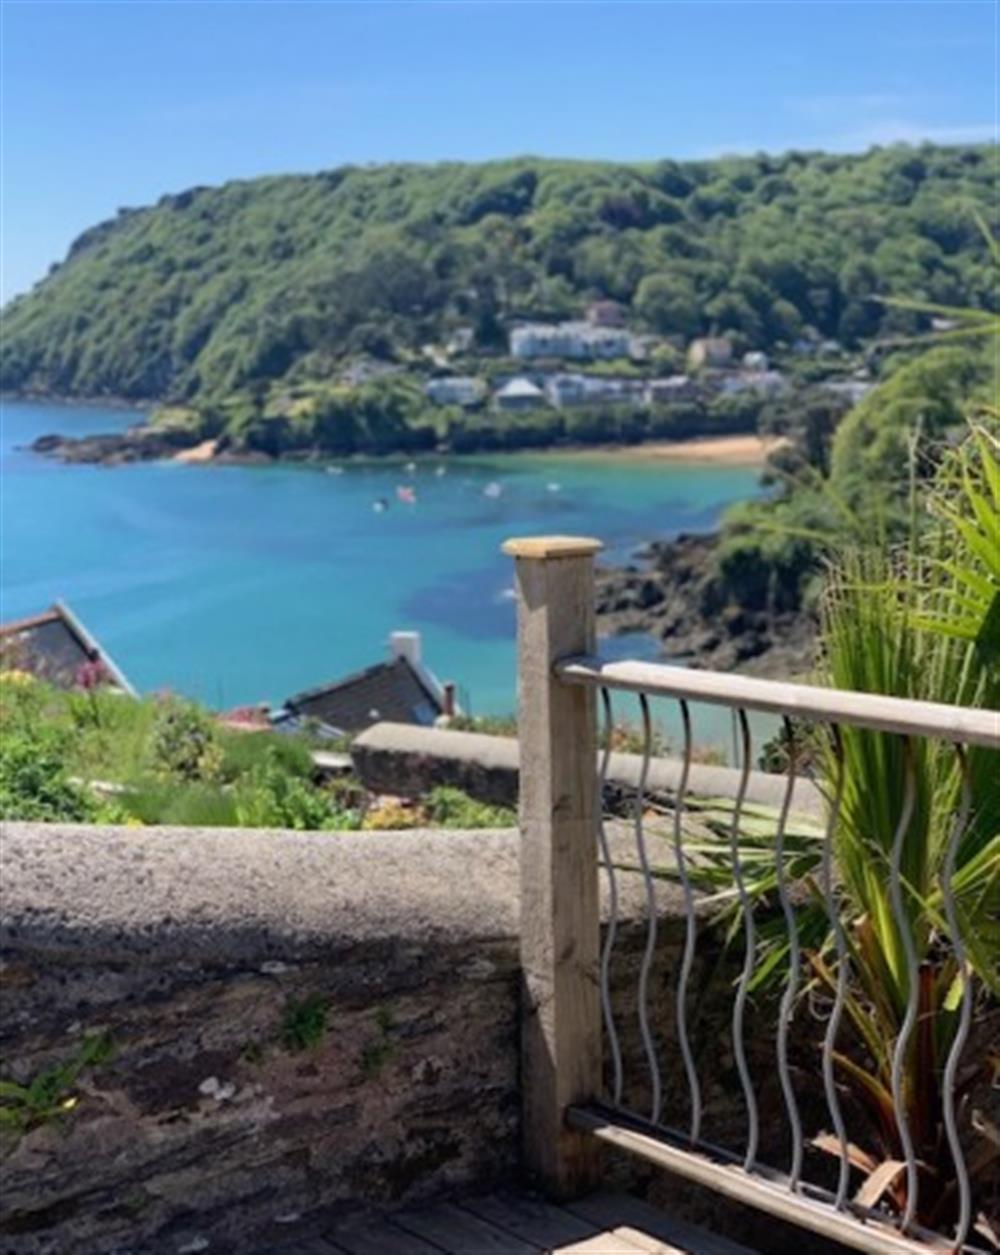 Another look at the view at 4 Hazeldene in Salcombe